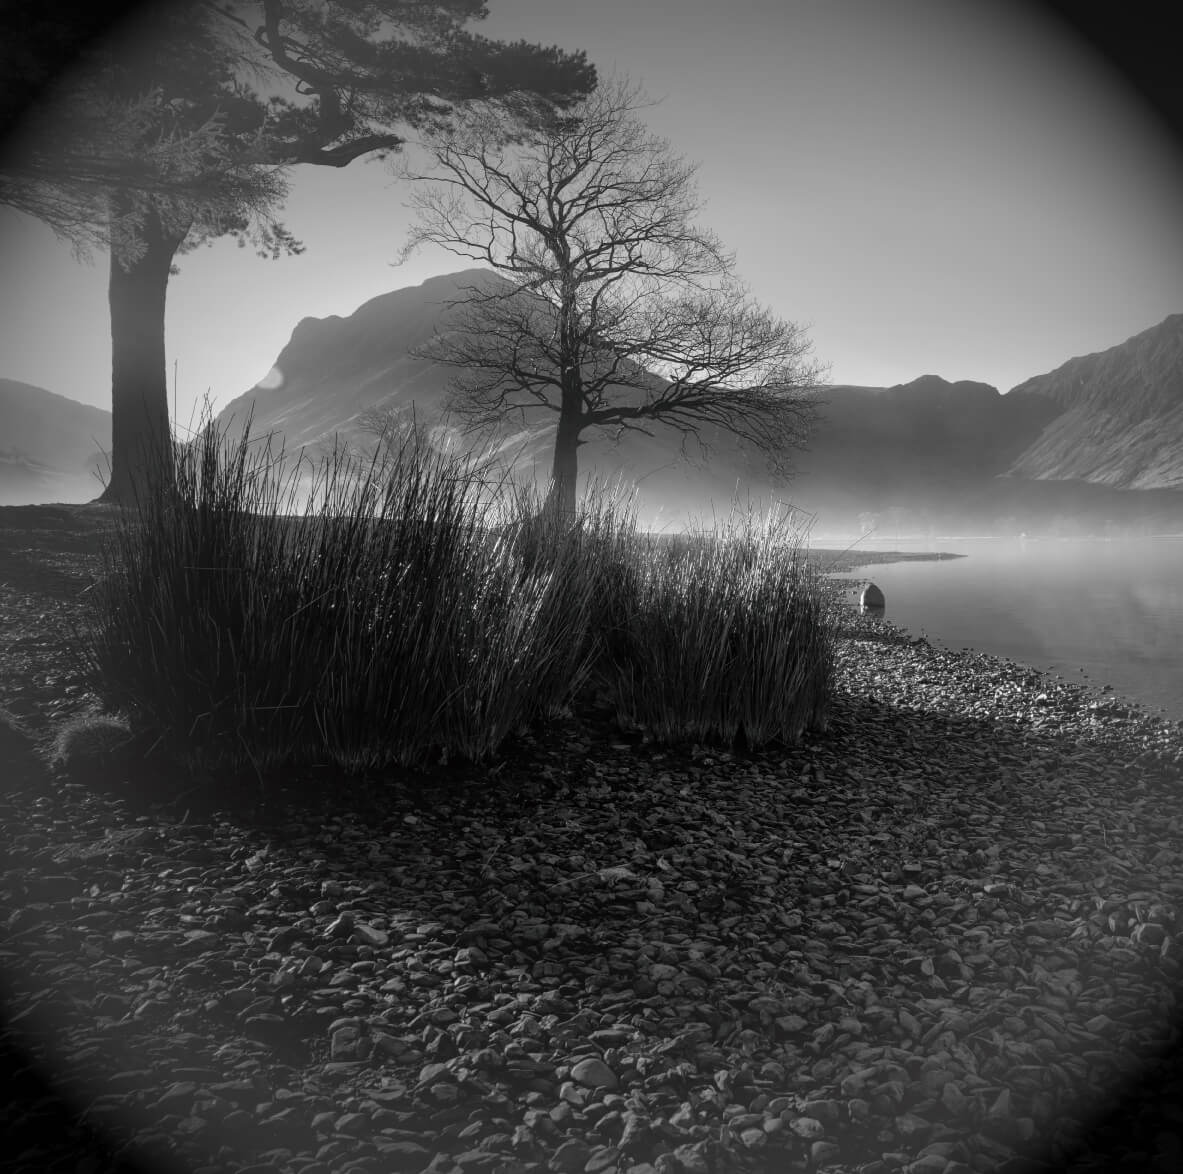 Pinhole Camera and The Image Formed